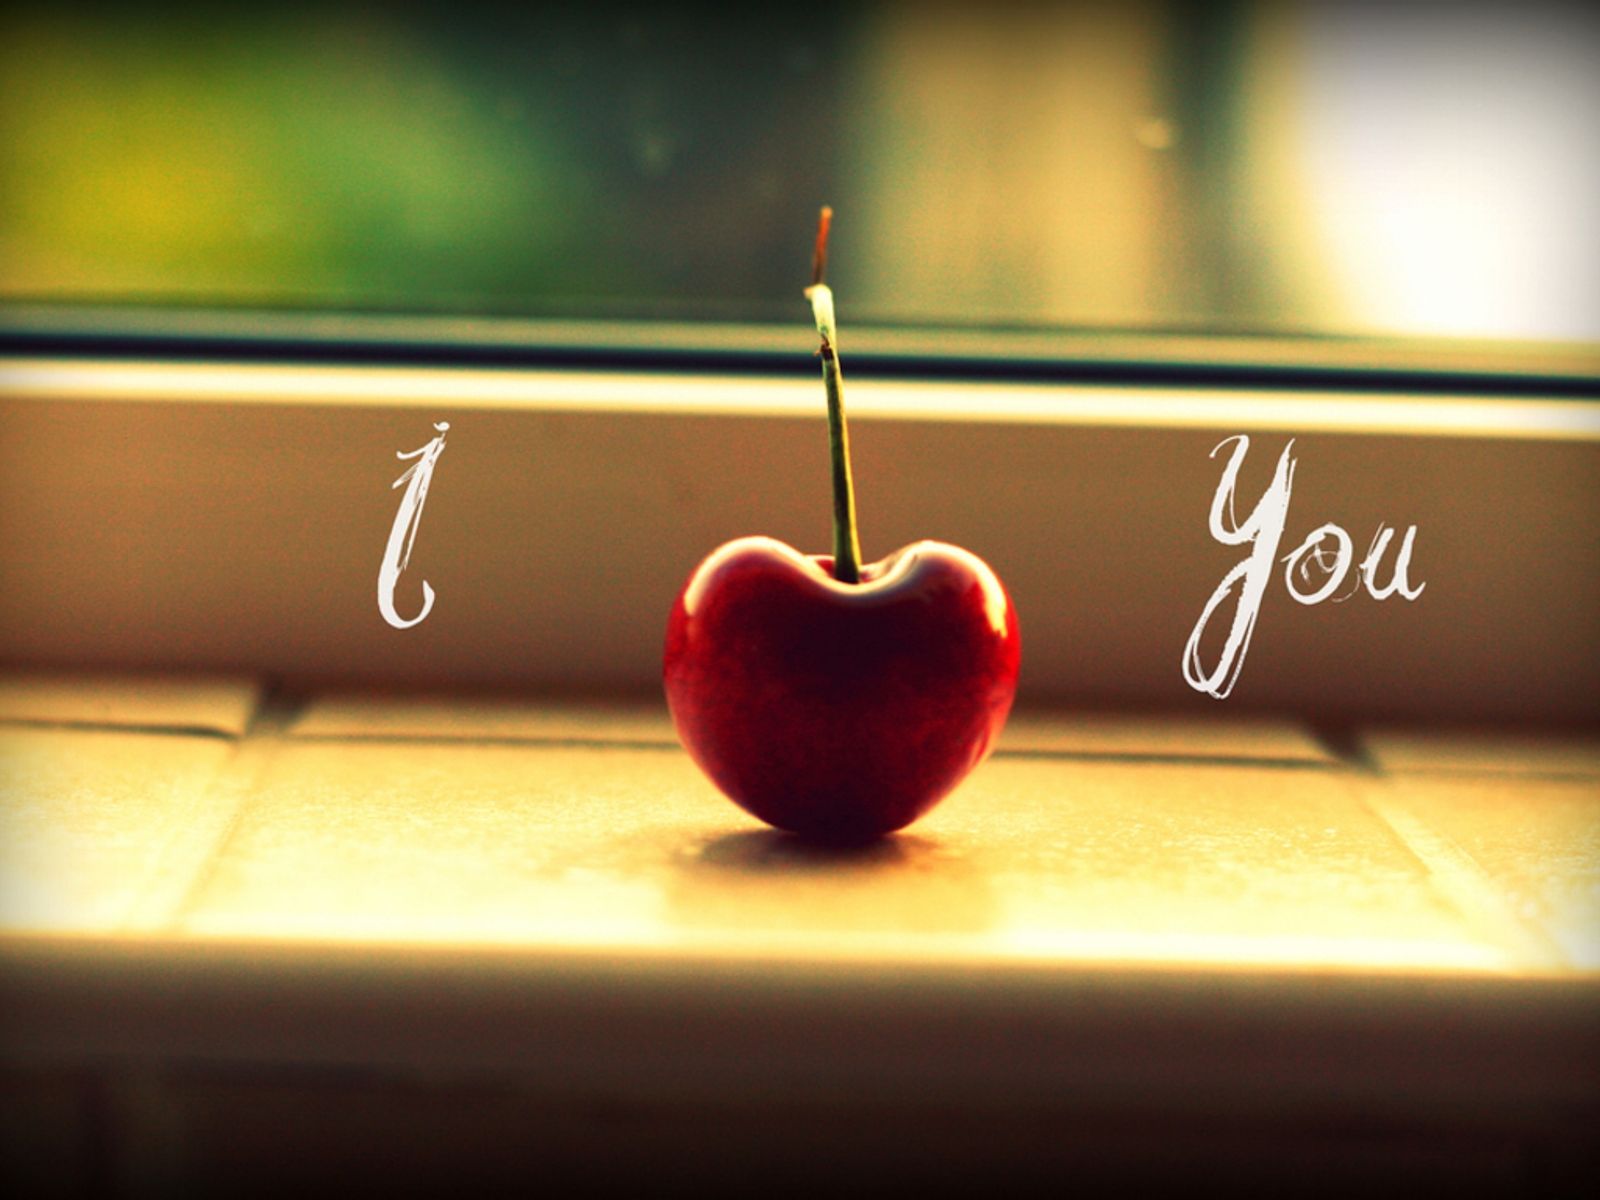 I Love You Wallpapers For Facebook - wallpaper